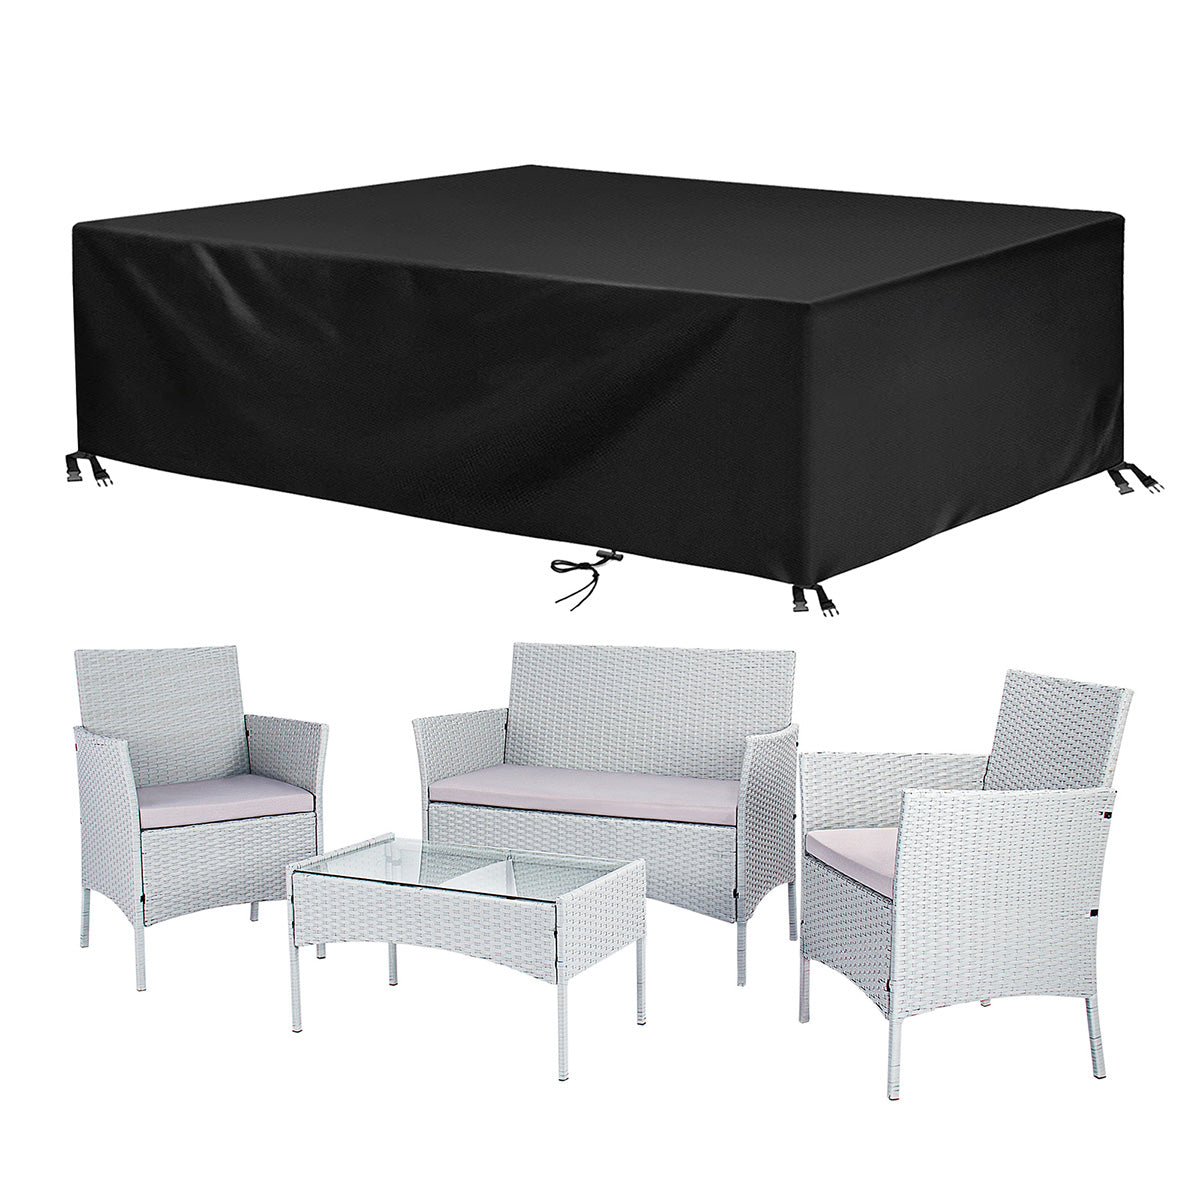 Image of 4-Seater Rattan Garden Furniture Patio Conversation Set Table Chairs, Grey / With Cover